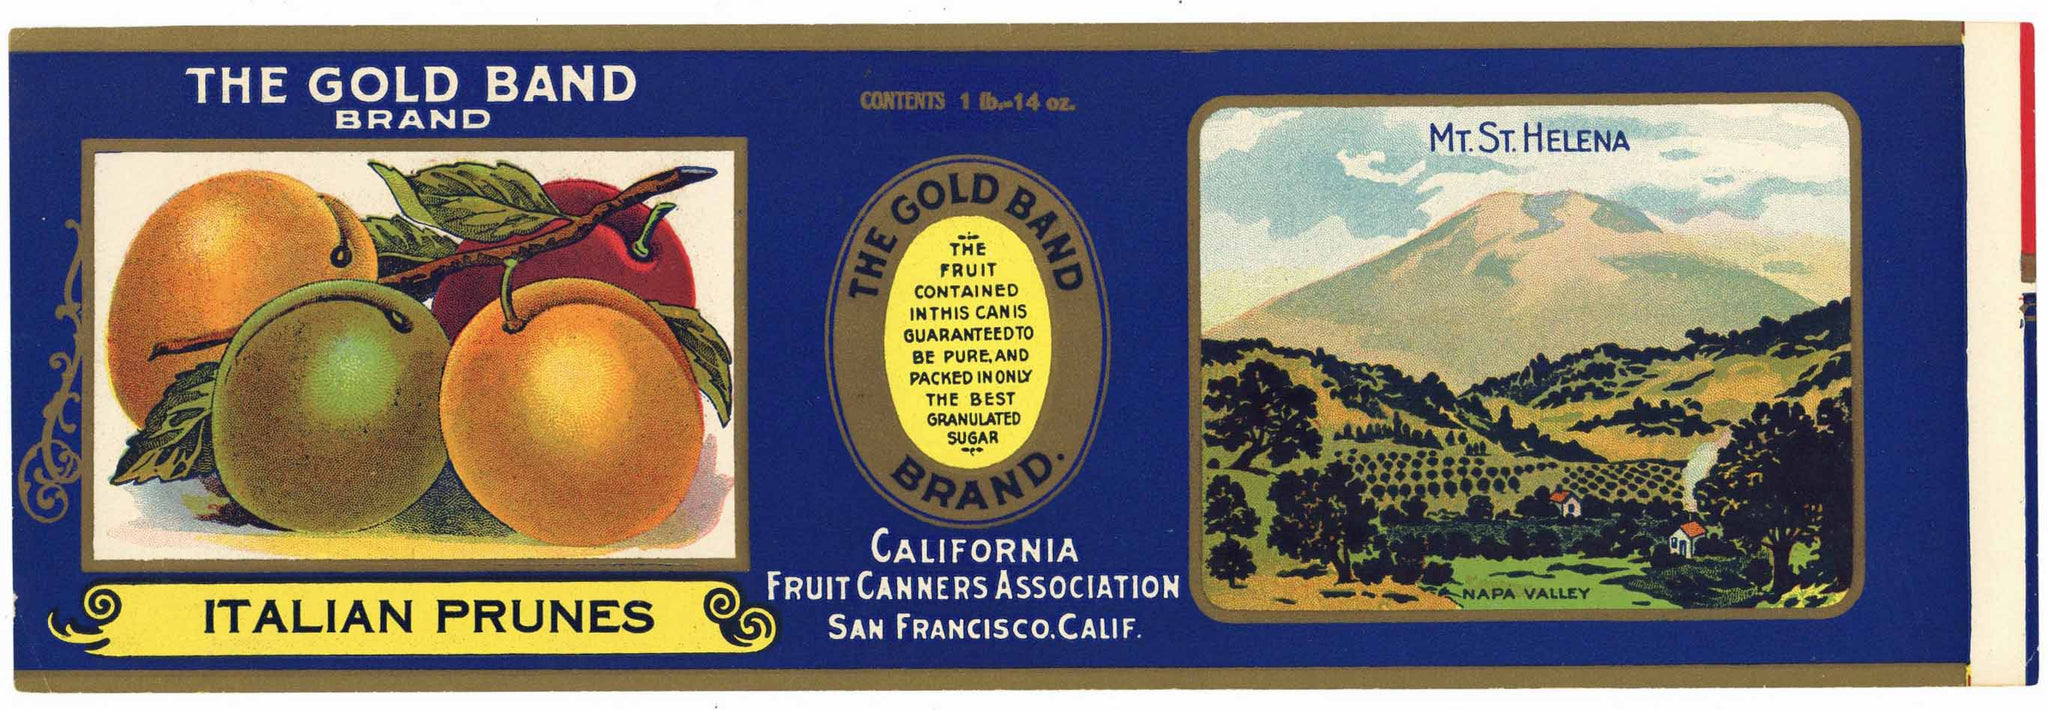 The Gold Band Brand Vintage Napa Valley Italian Prunes Can Label